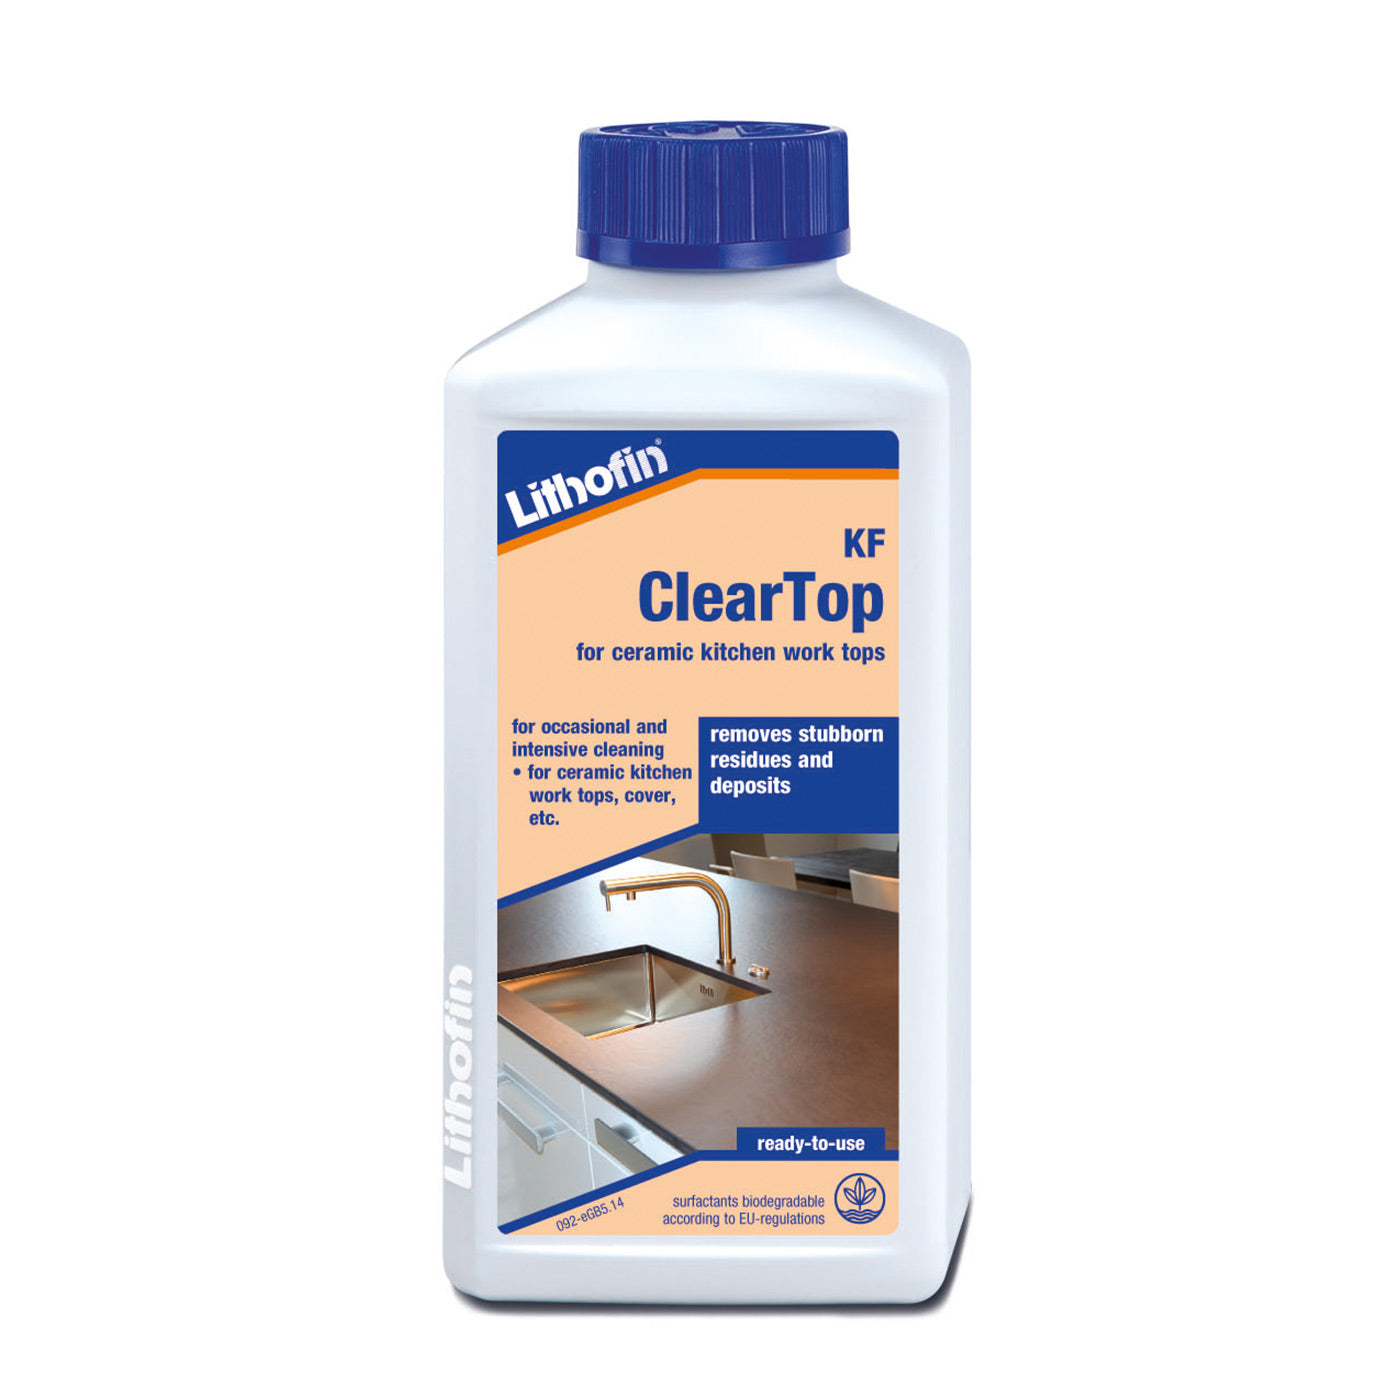 ClearTop LITHOFIN for ceramic kitchen work tops